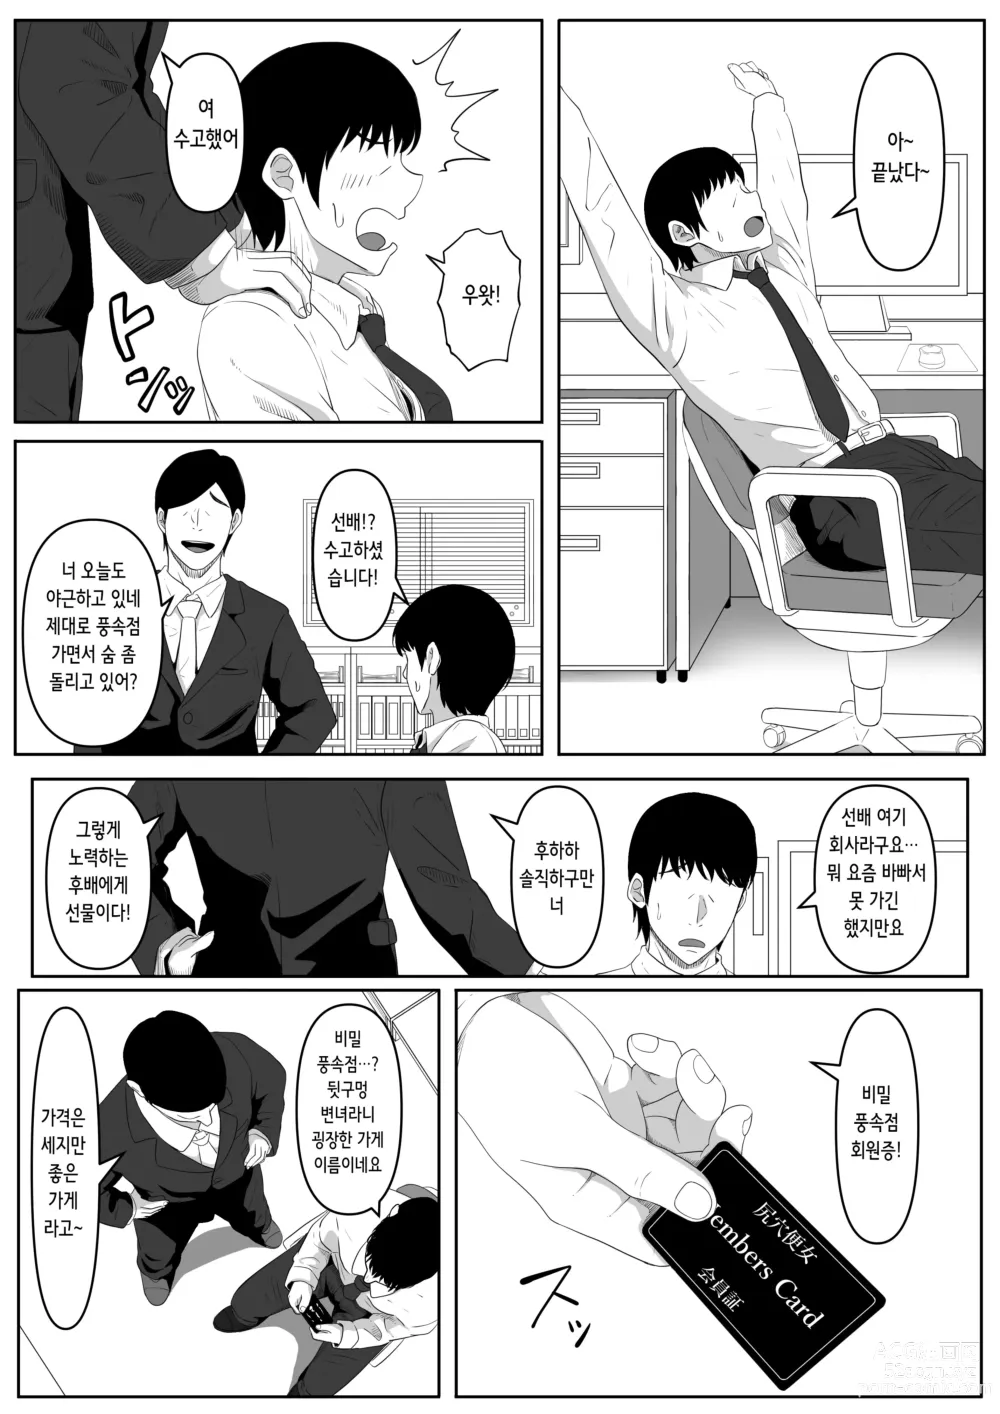 Page 3 of doujinshi 뒷구멍 변녀